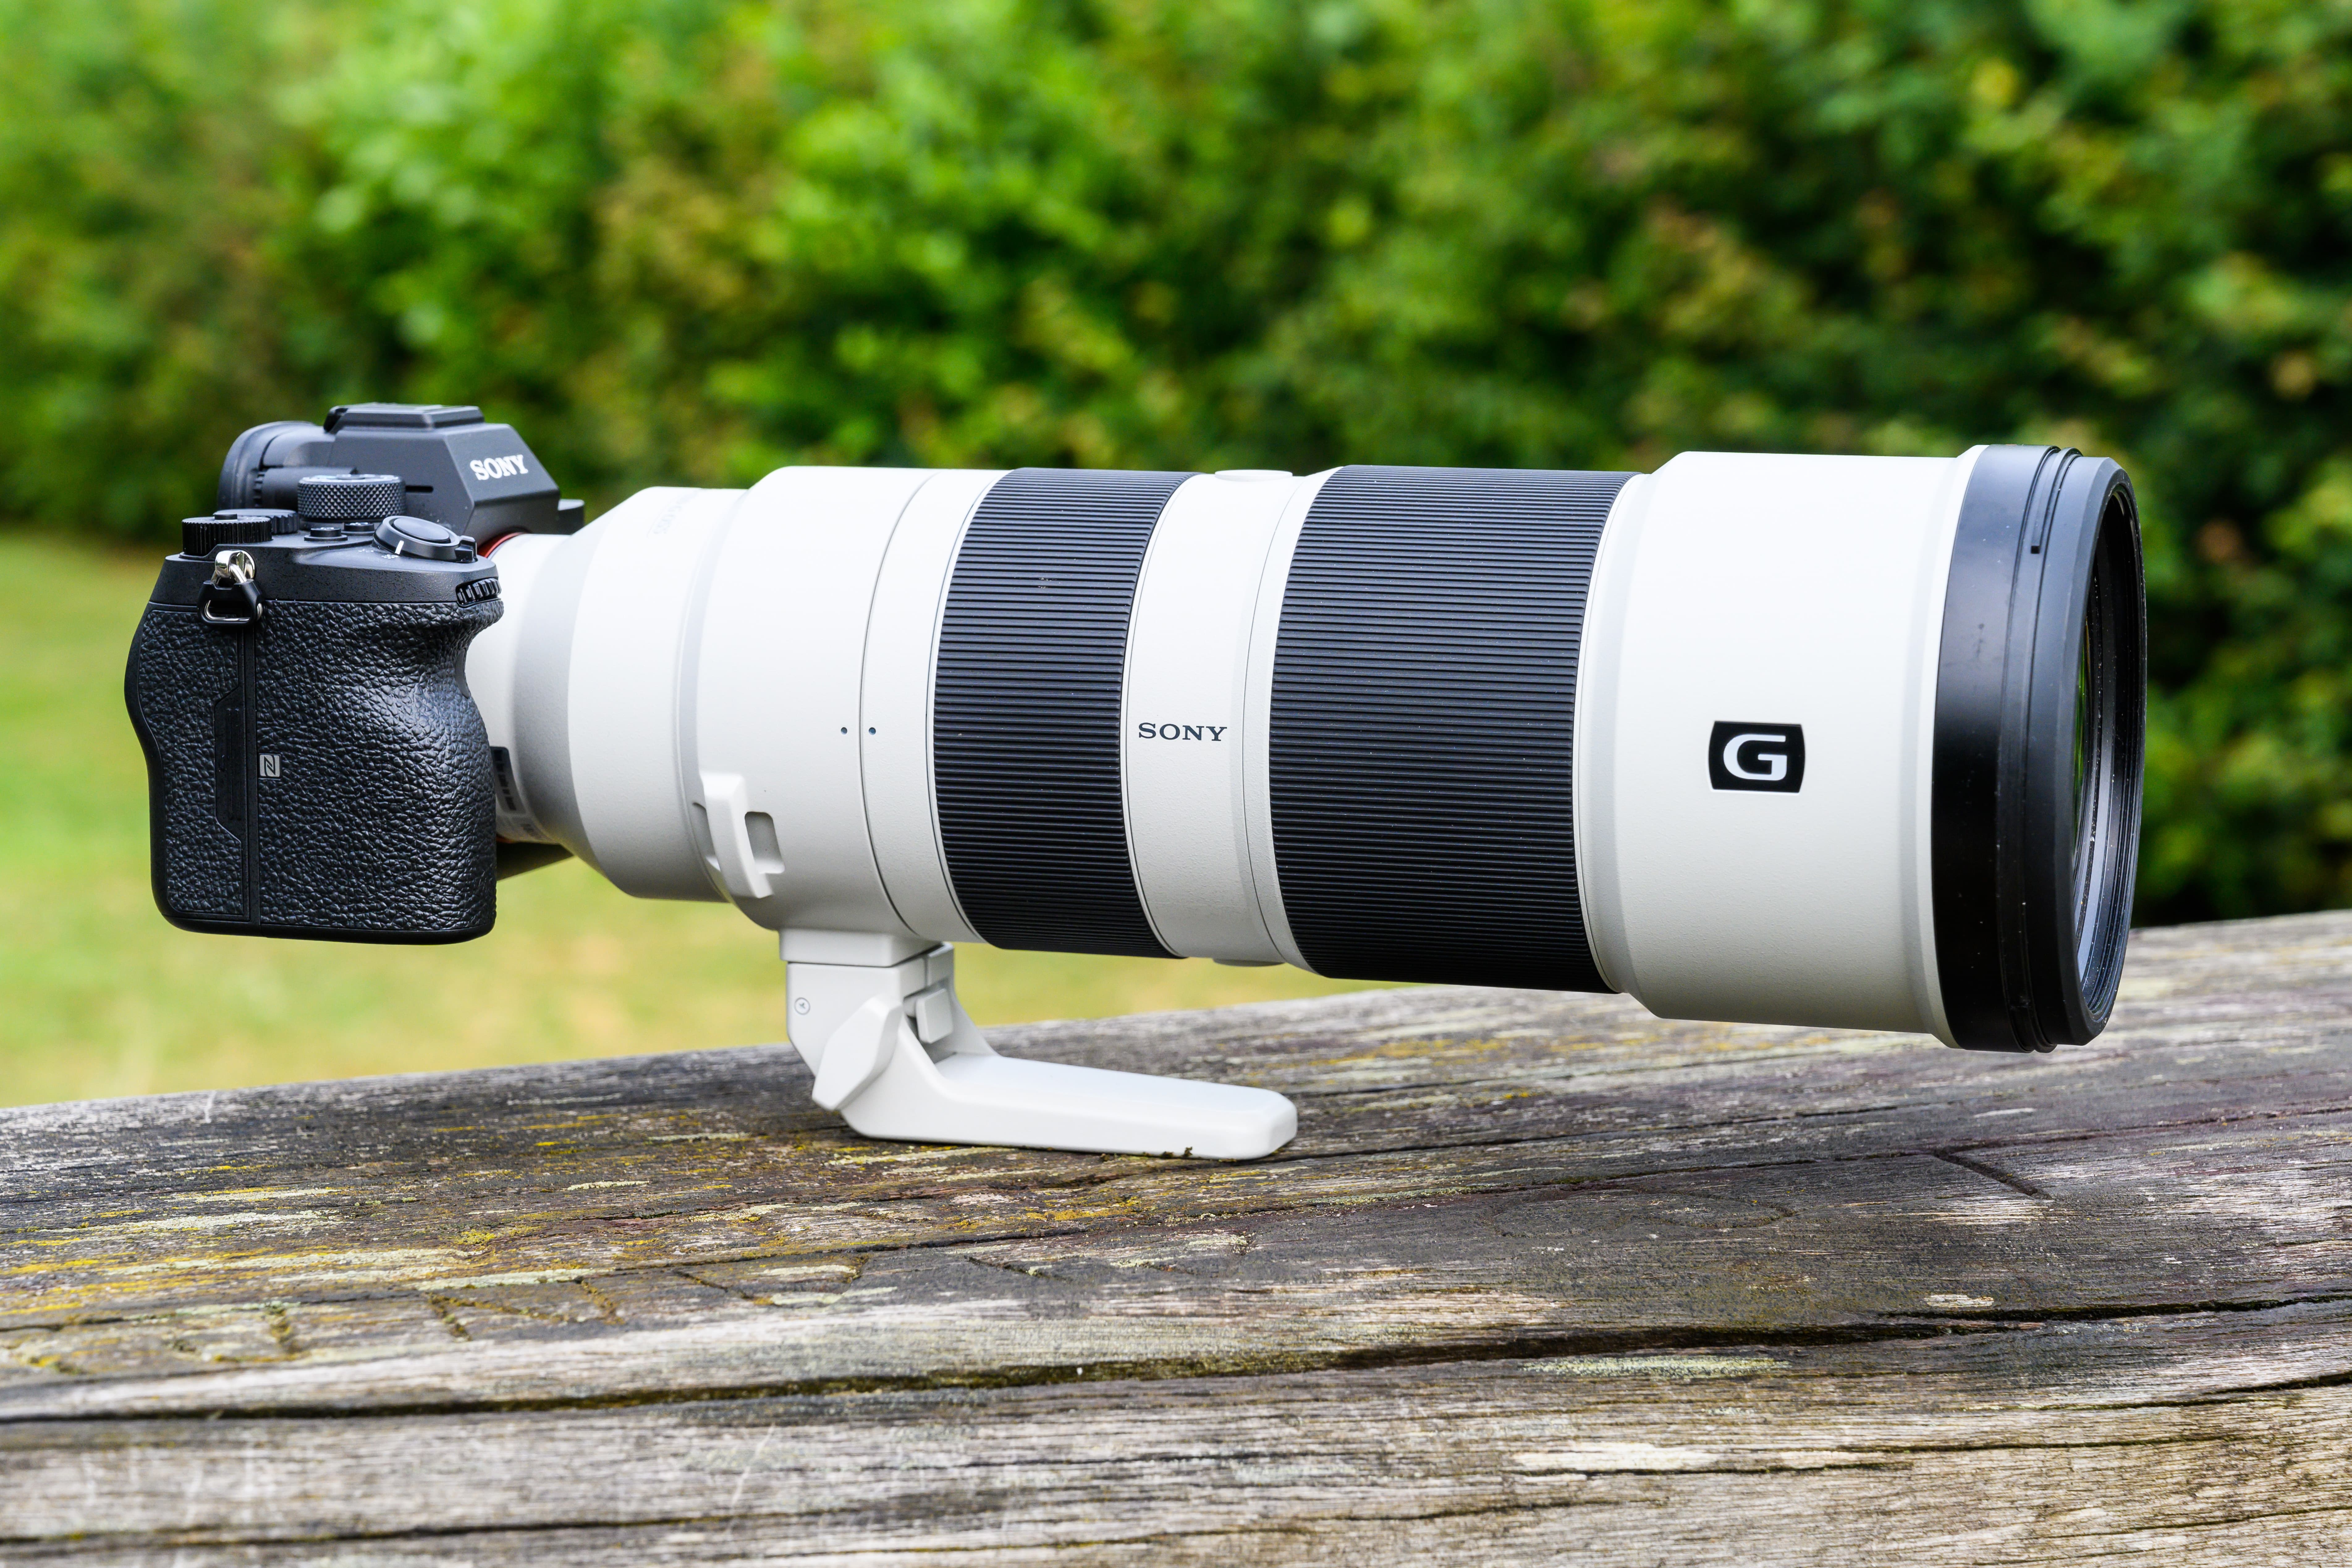 Superior Performance of the Sony 200-600mm F5.6-6.3 G OSS Super-Telephoto  Zoom Lens